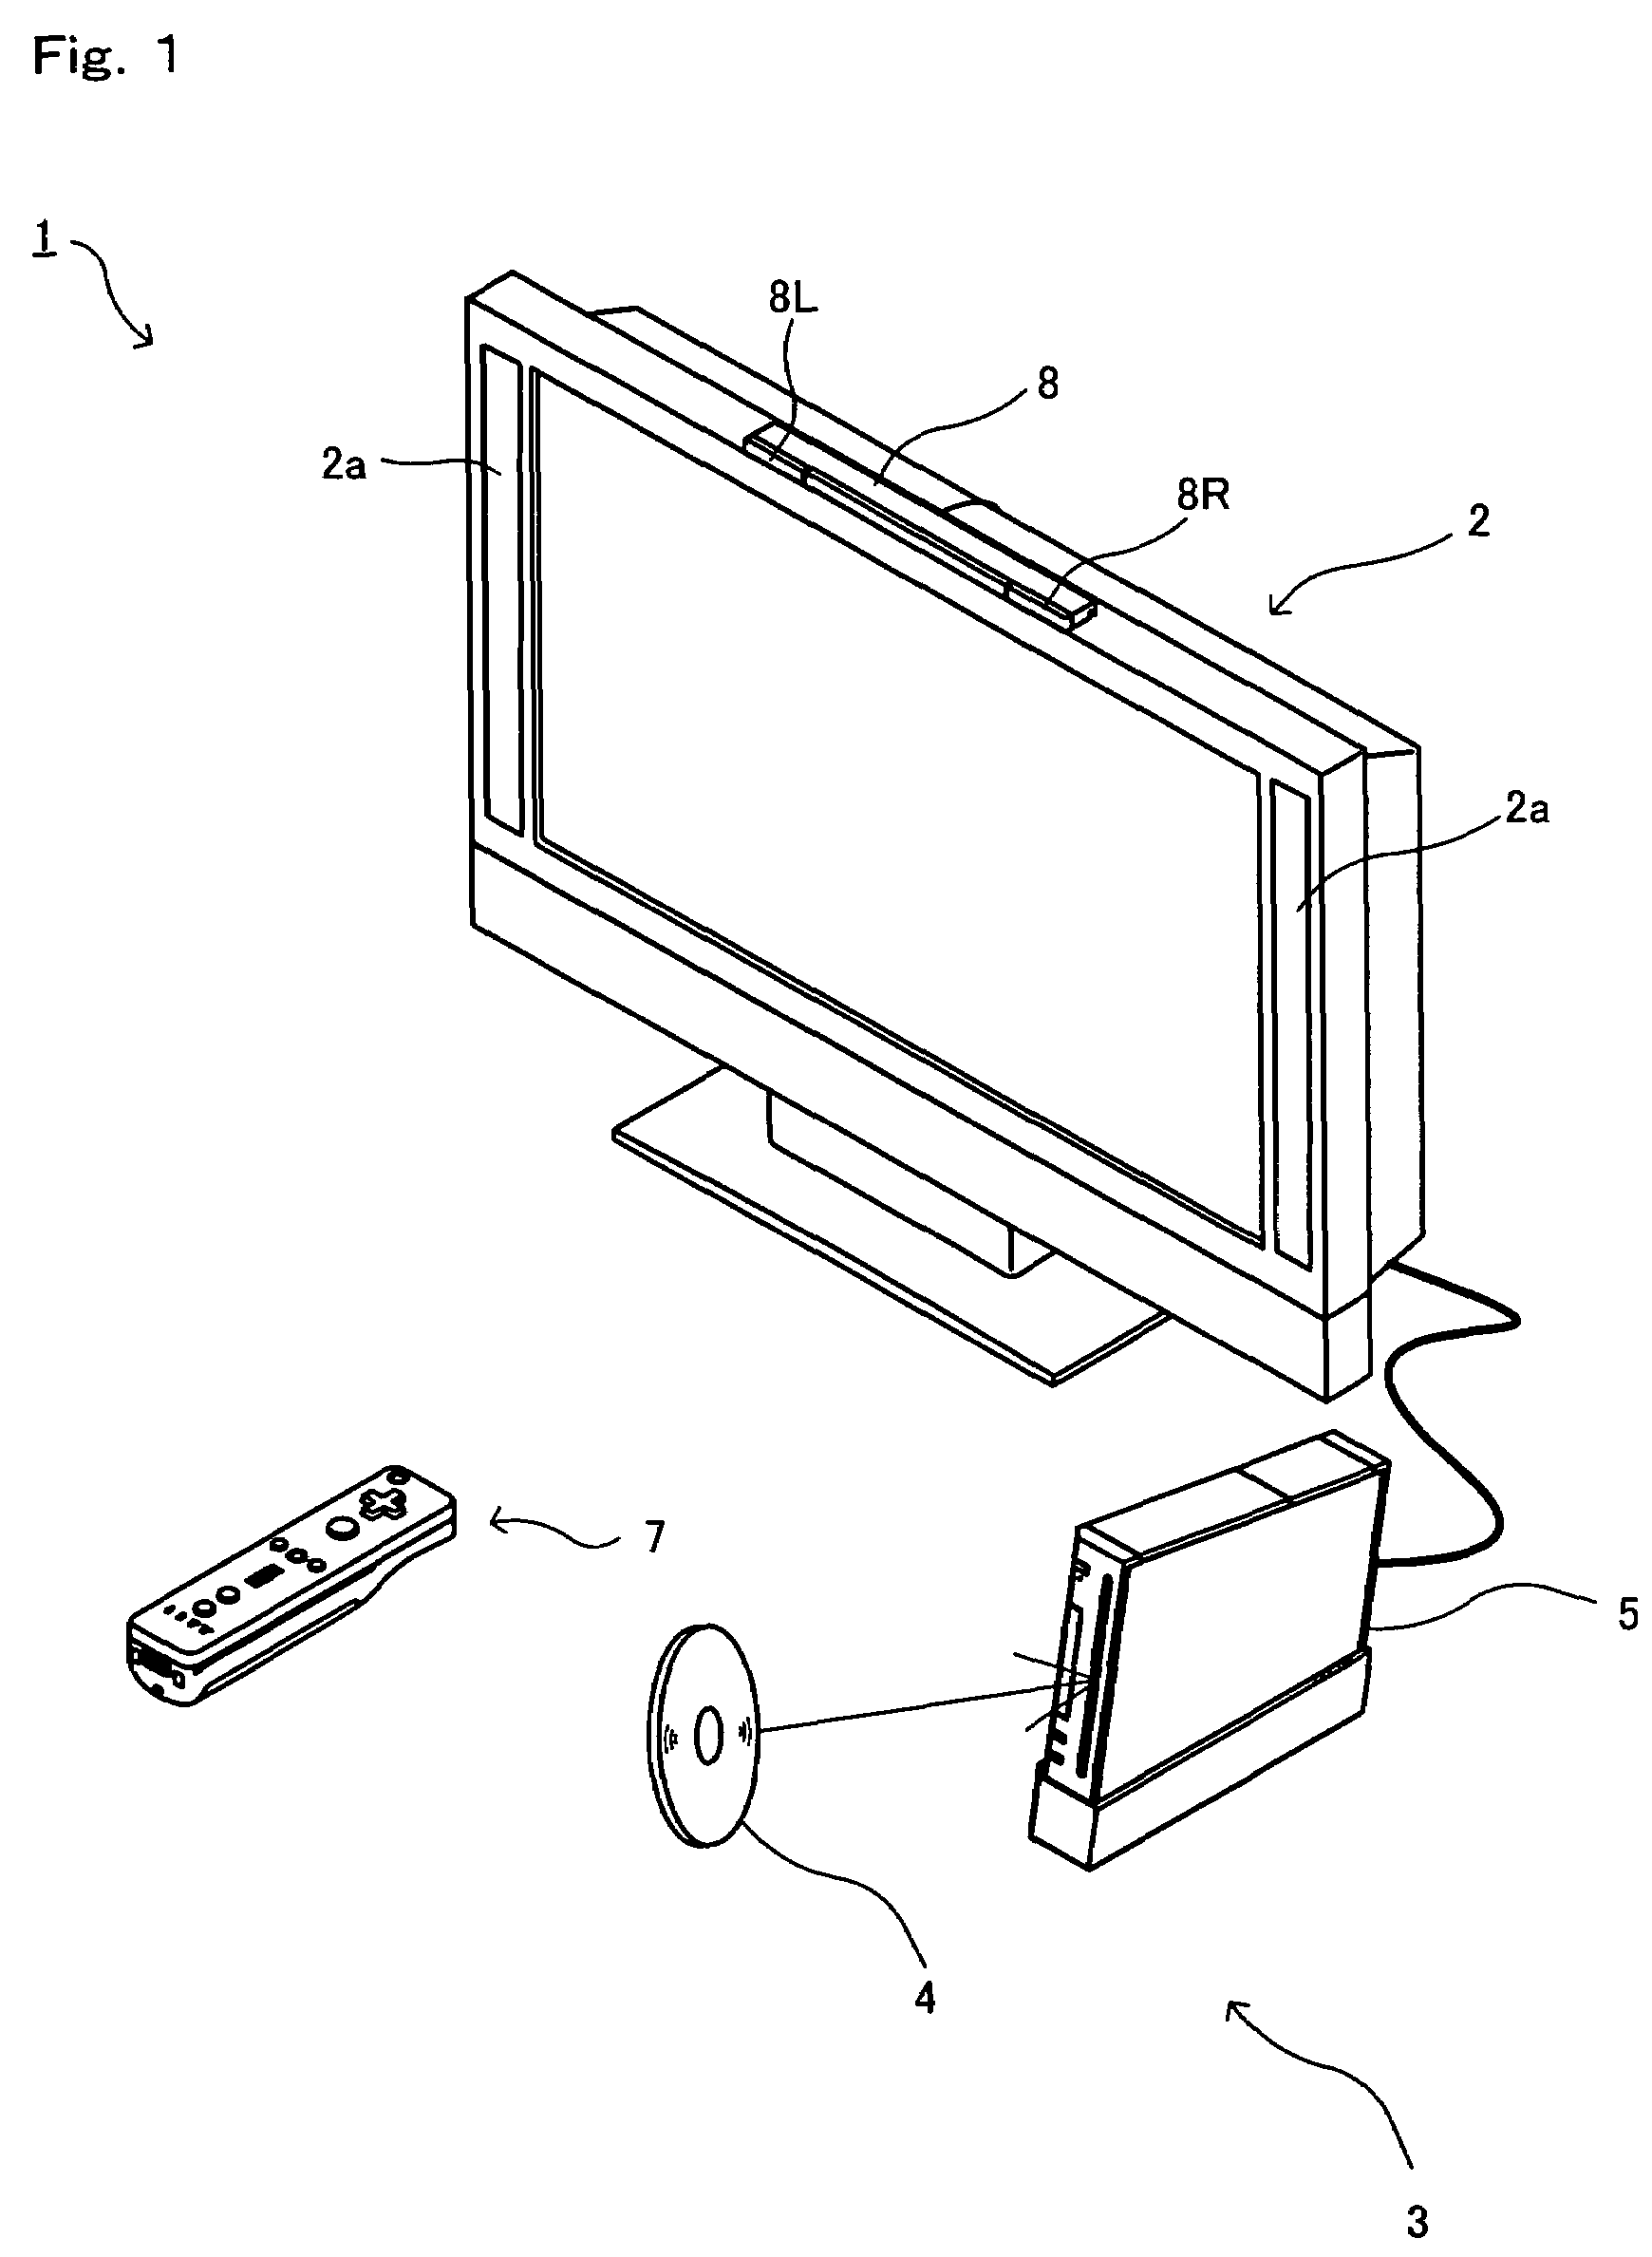 Computer-readable storage medium having game program stored thereon and game apparatus